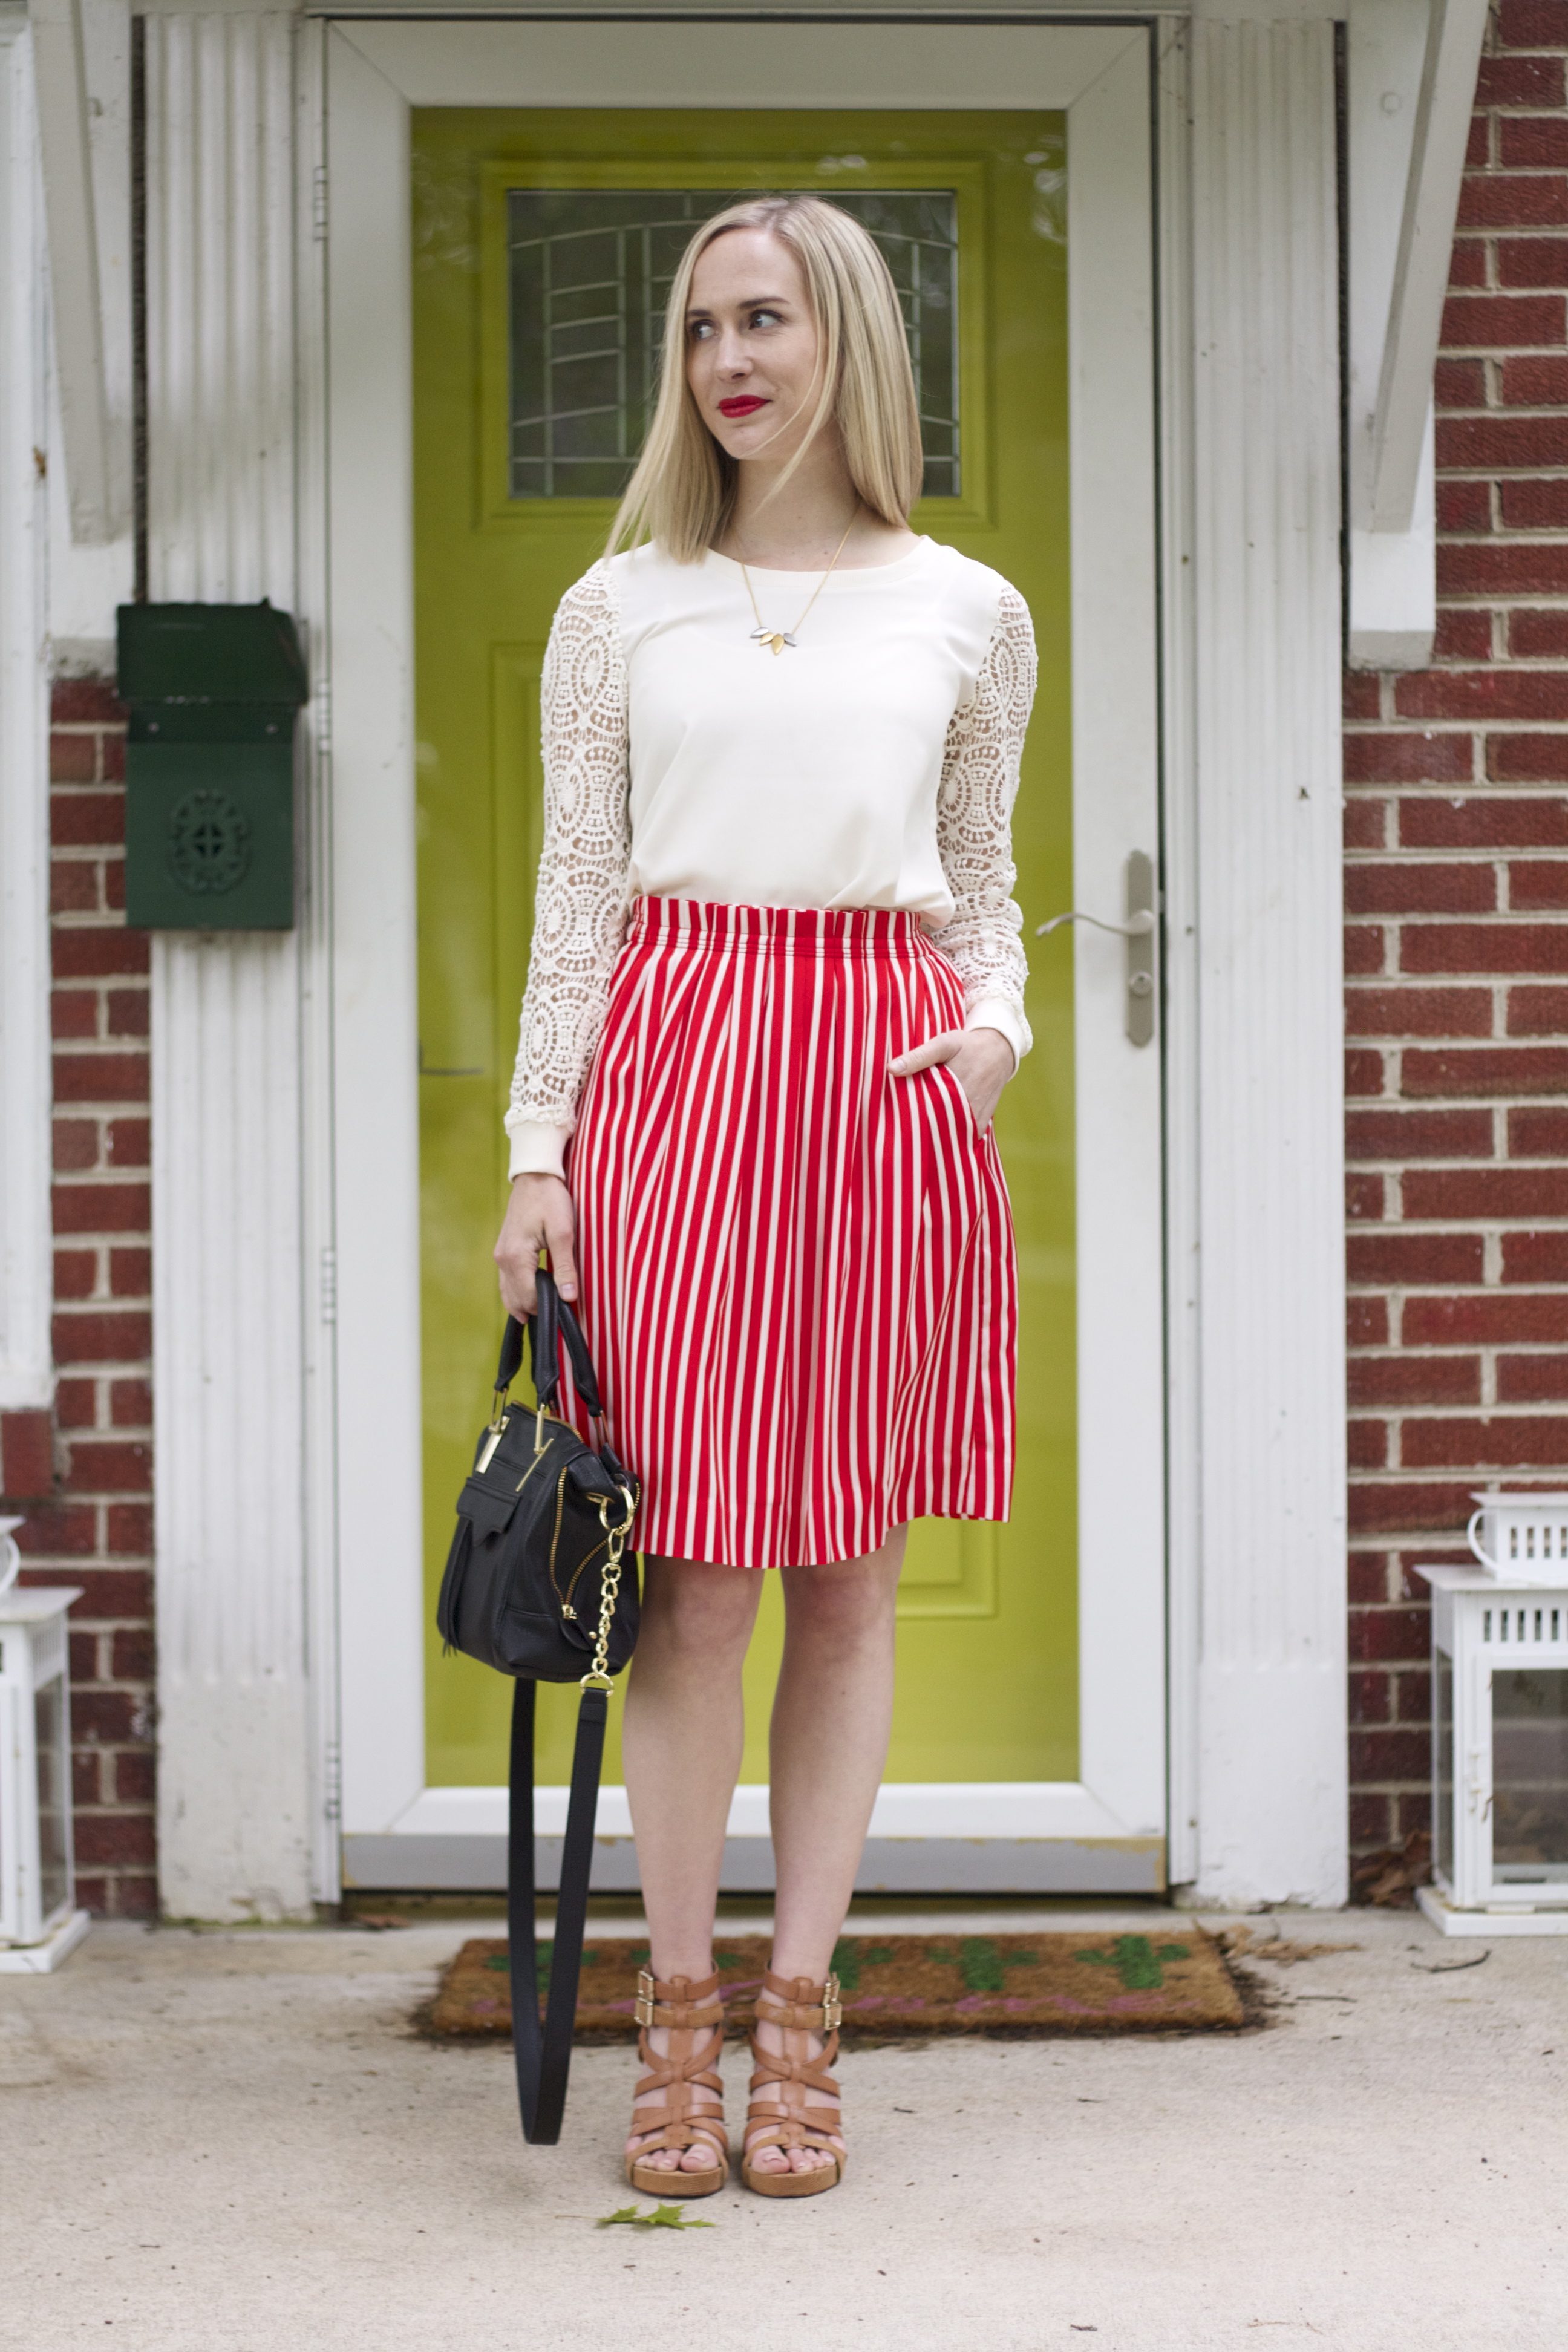 j.crew striped skirt, tan wedges outfit